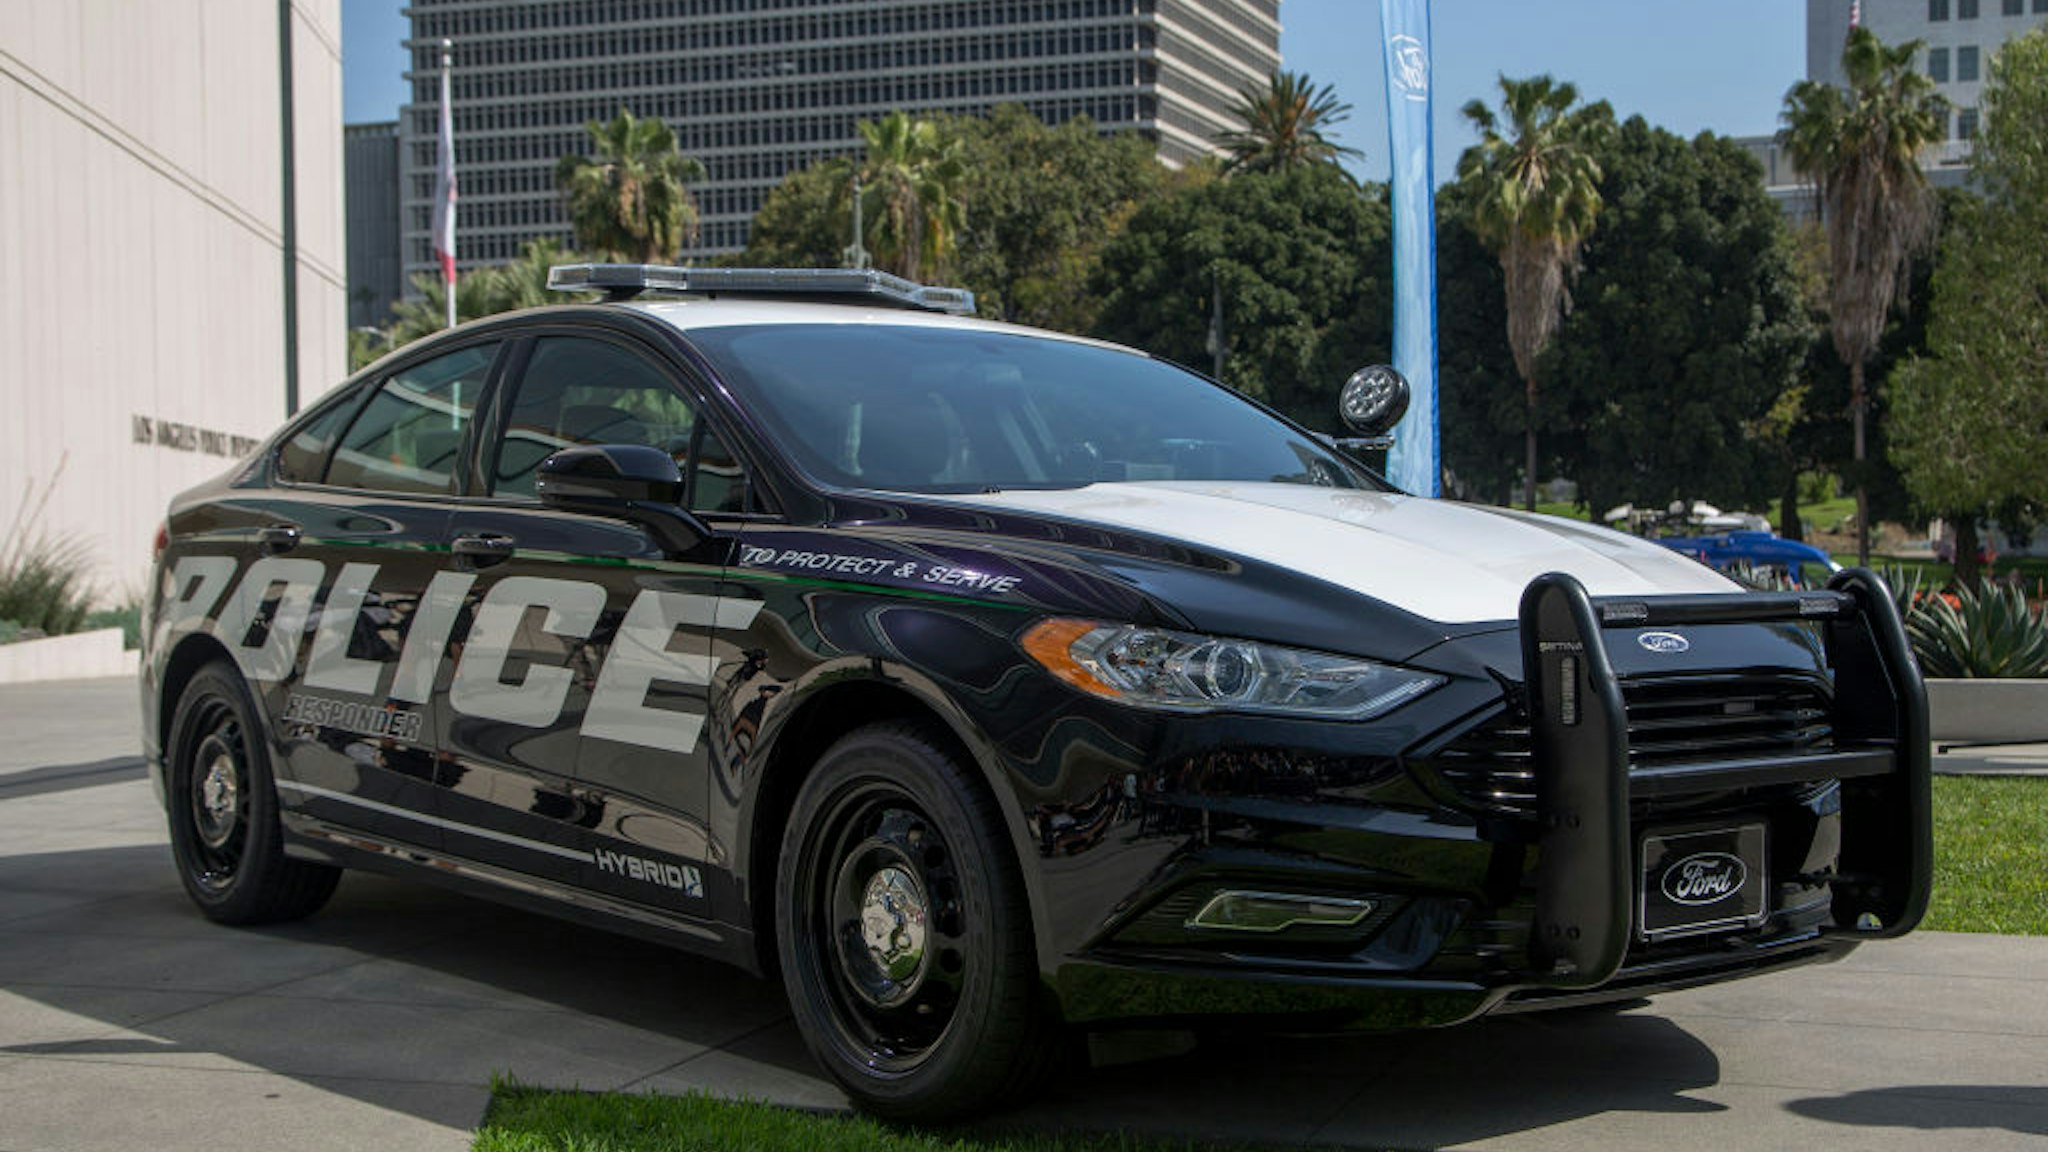 A hybrid police car is seen at the unveiling of two new Ford Fusion hybrid pursuit-rated Police Responder cars at Los Angeles Police Department headquarters on April 10, 2017 in Los Angeles, California.